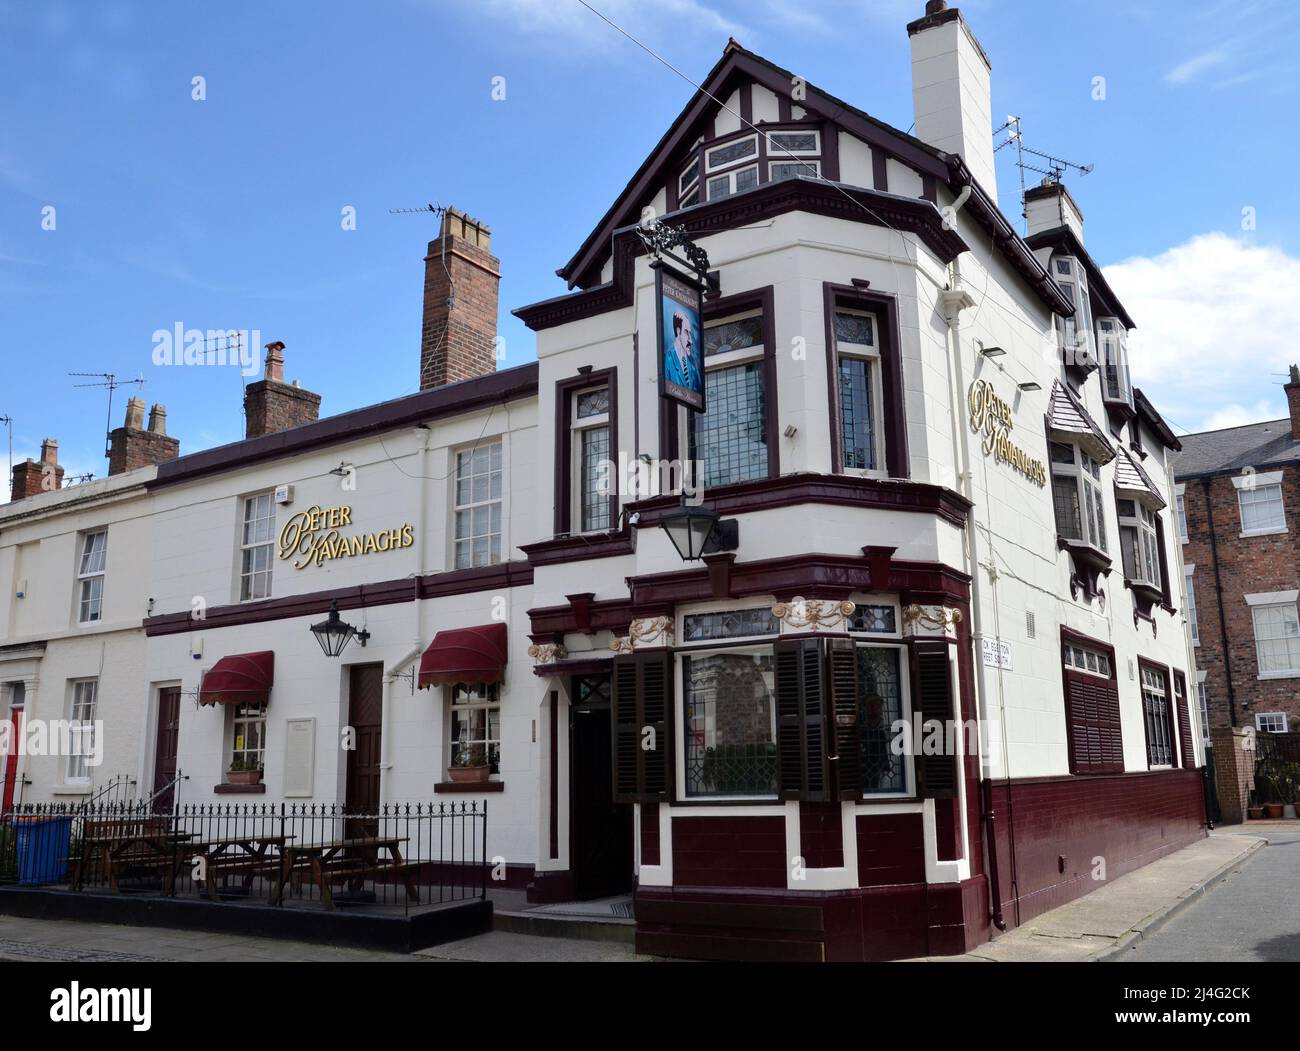 Peter Kavanaghs, a famous pub in Liverpool, Merseyside Stock Photo